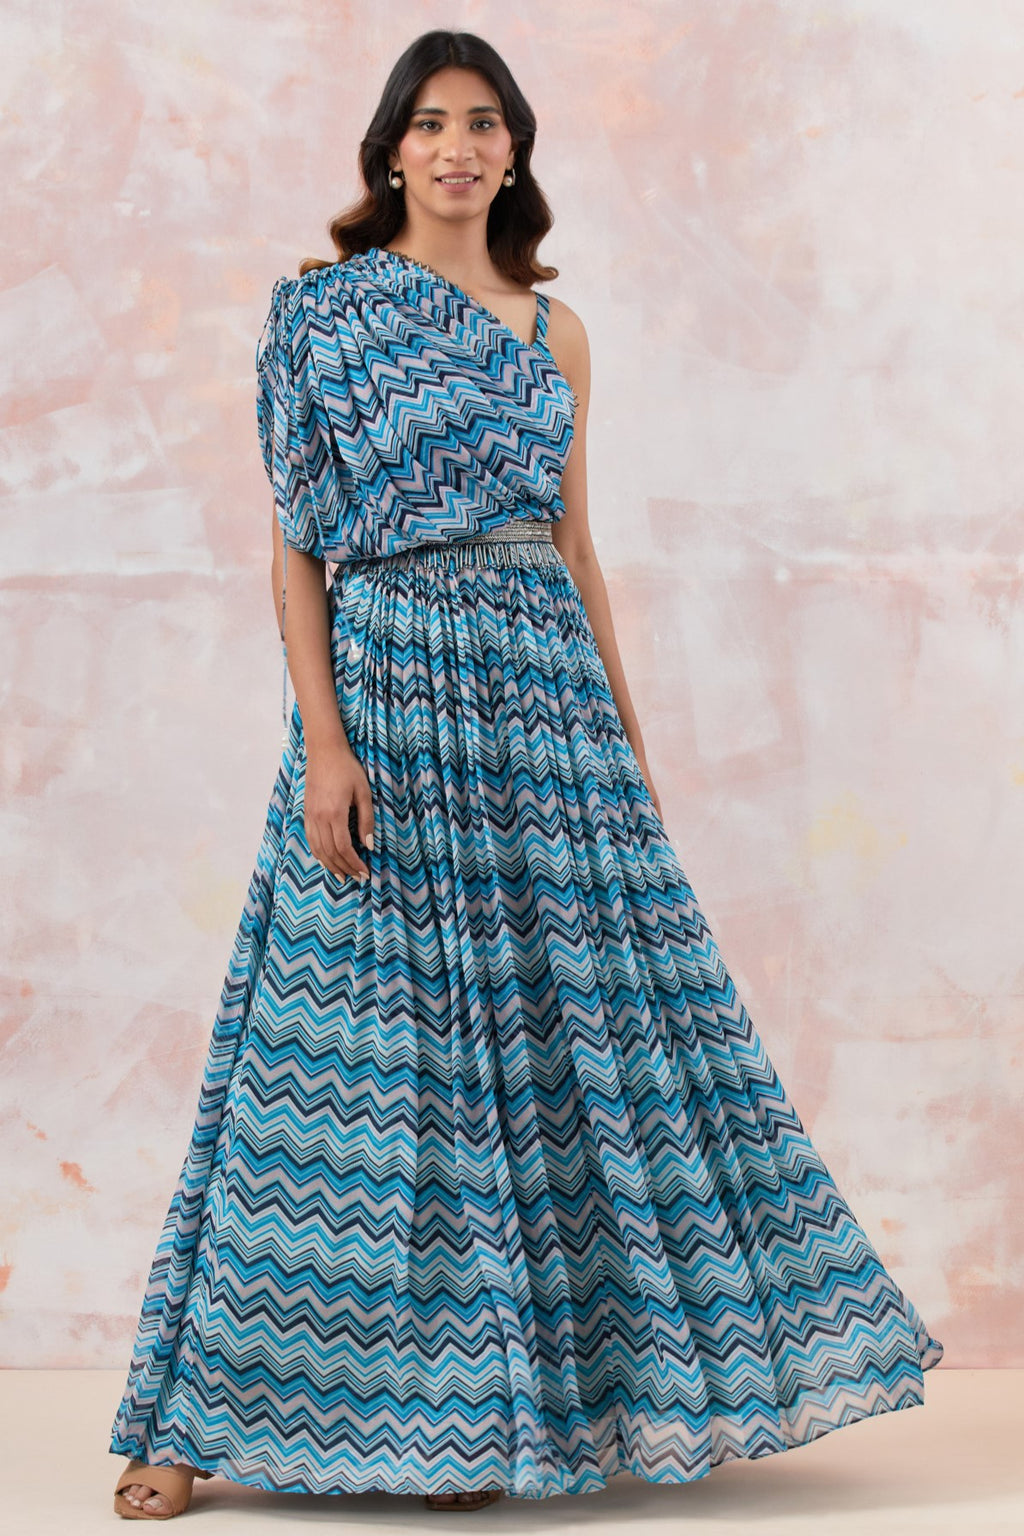 Buy a Blue stylish gown dress crafted in the softest Chinon fabric. the draped neckline brings in glamour. Dazzle on weddings and special occasions with exquisite Indian designer dresses, sharara suits, Anarkali suits, and wedding lehengas from Pure Elegance Indian fashion store in the USA.